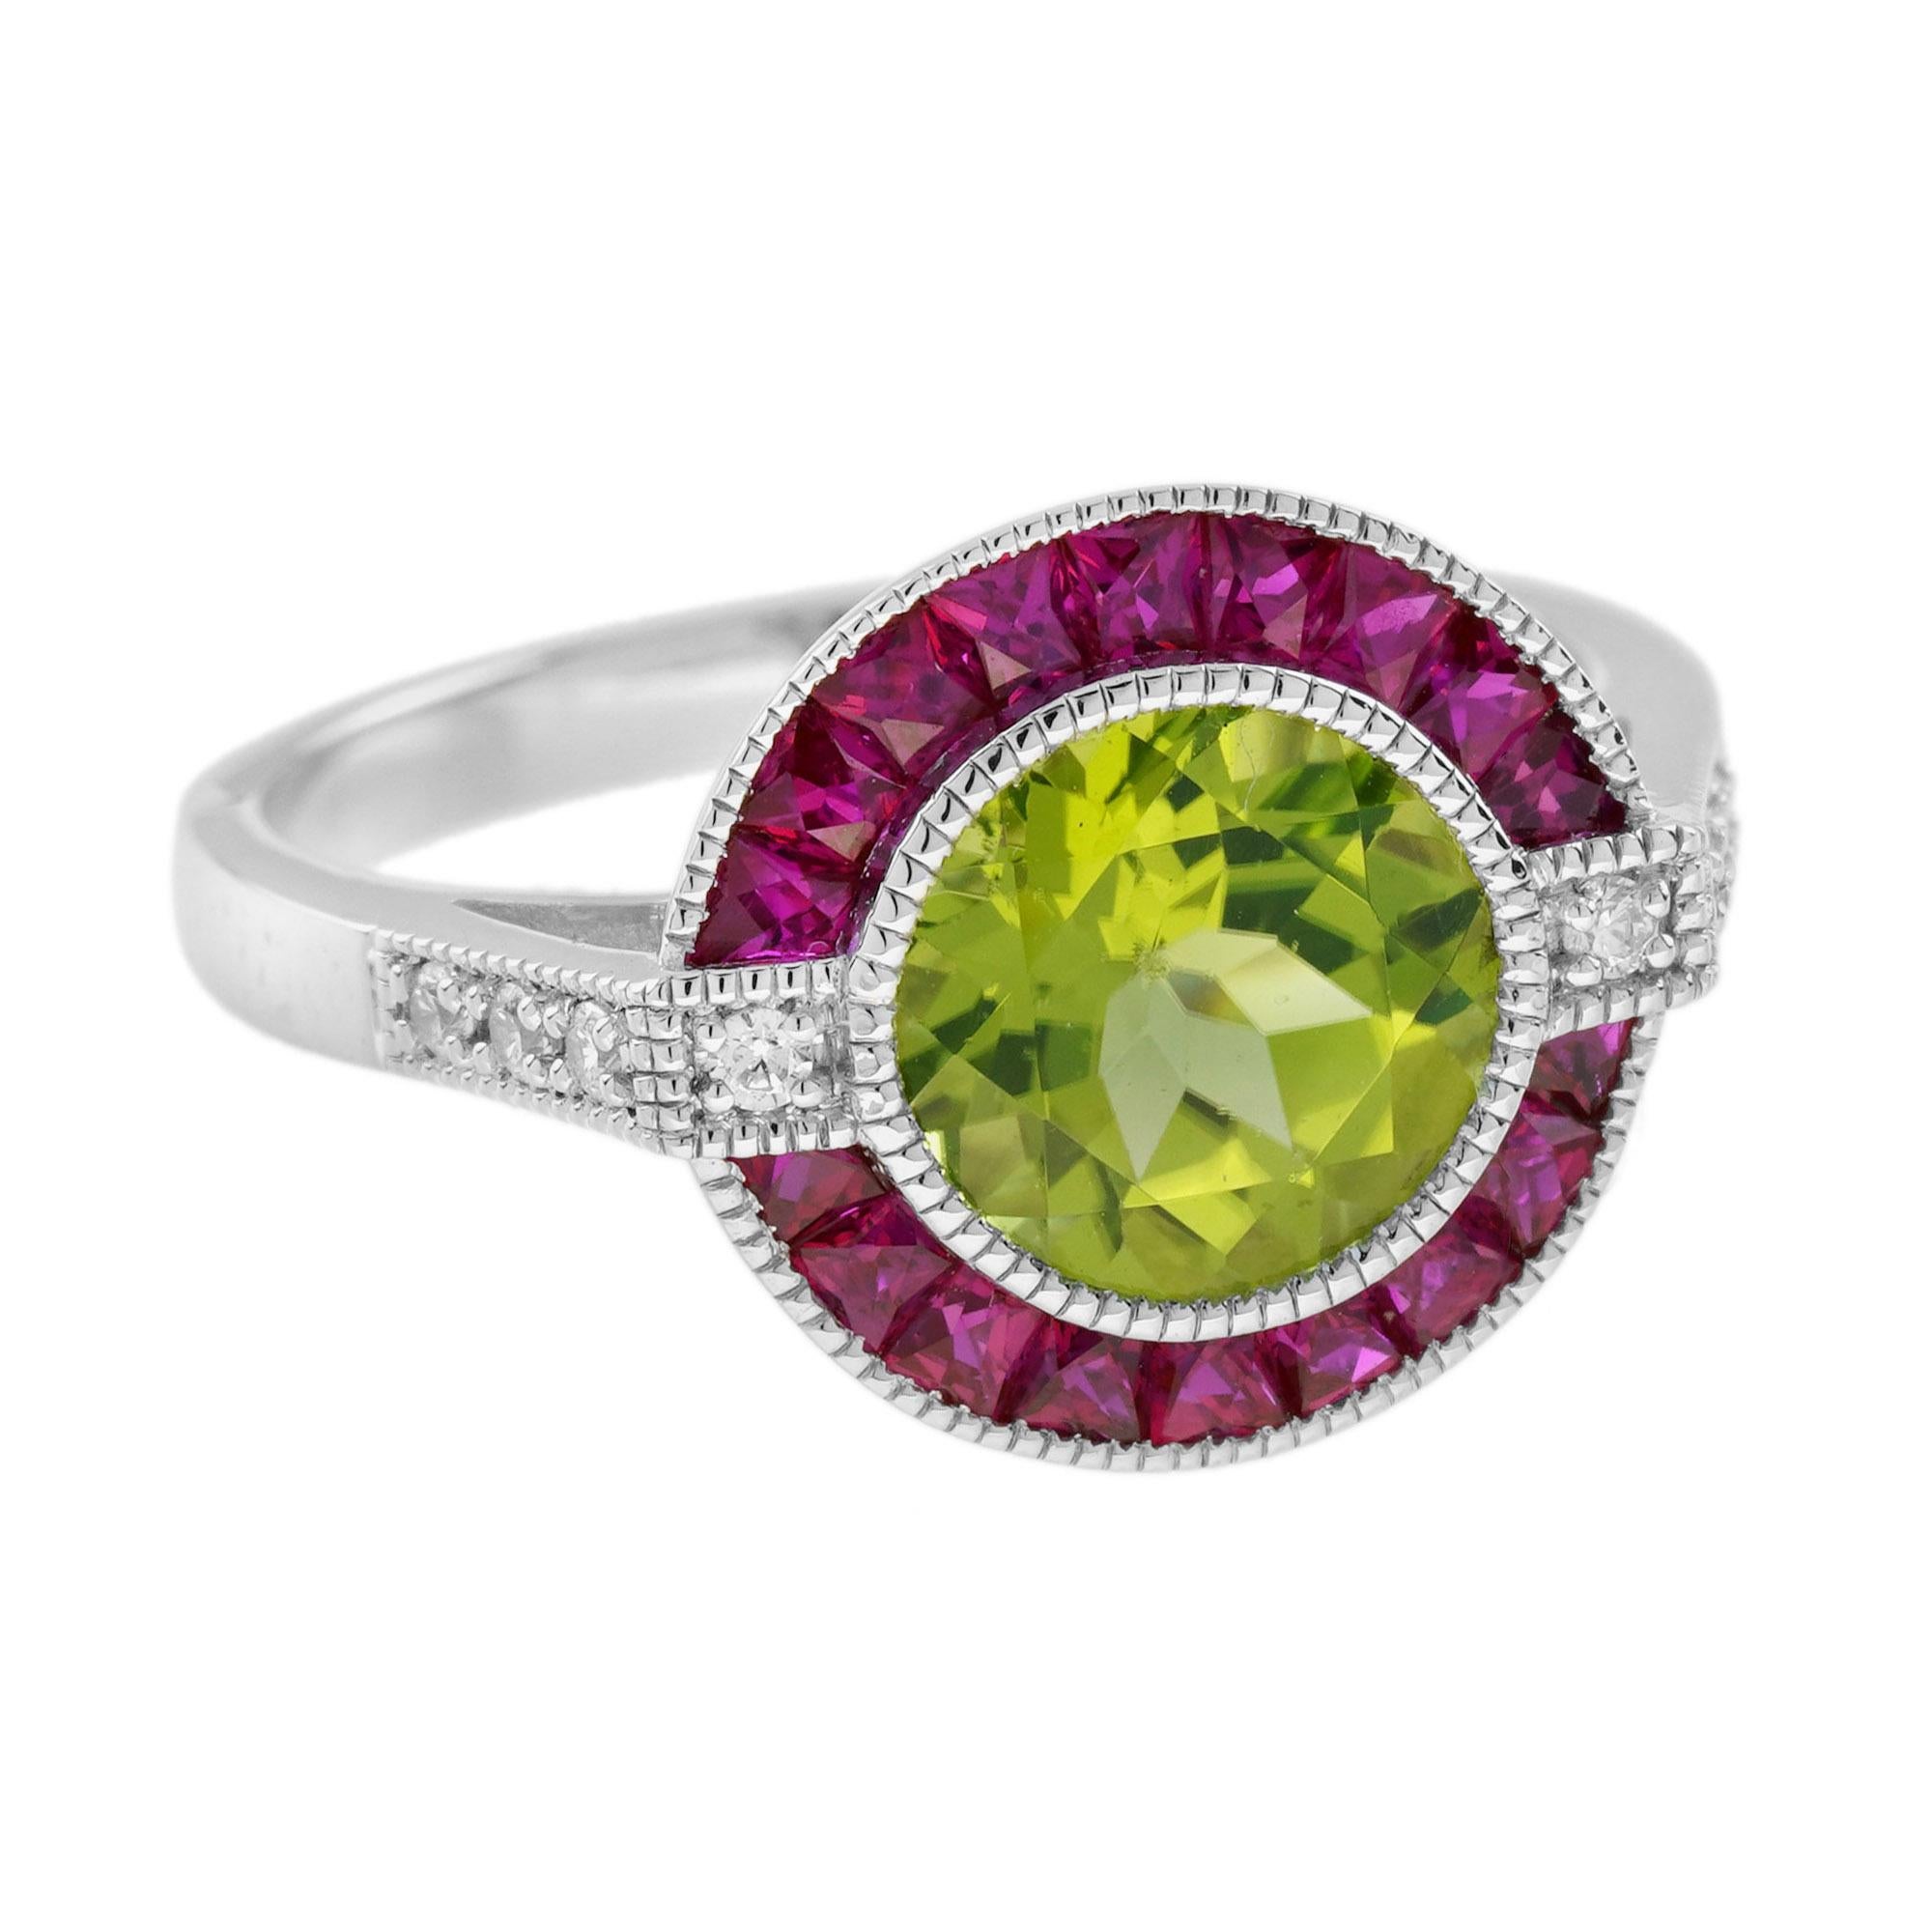 For Sale:  Peridot Ruby Diamond Art Deco Style Celebrate Target Ring in 14K White Gold 3